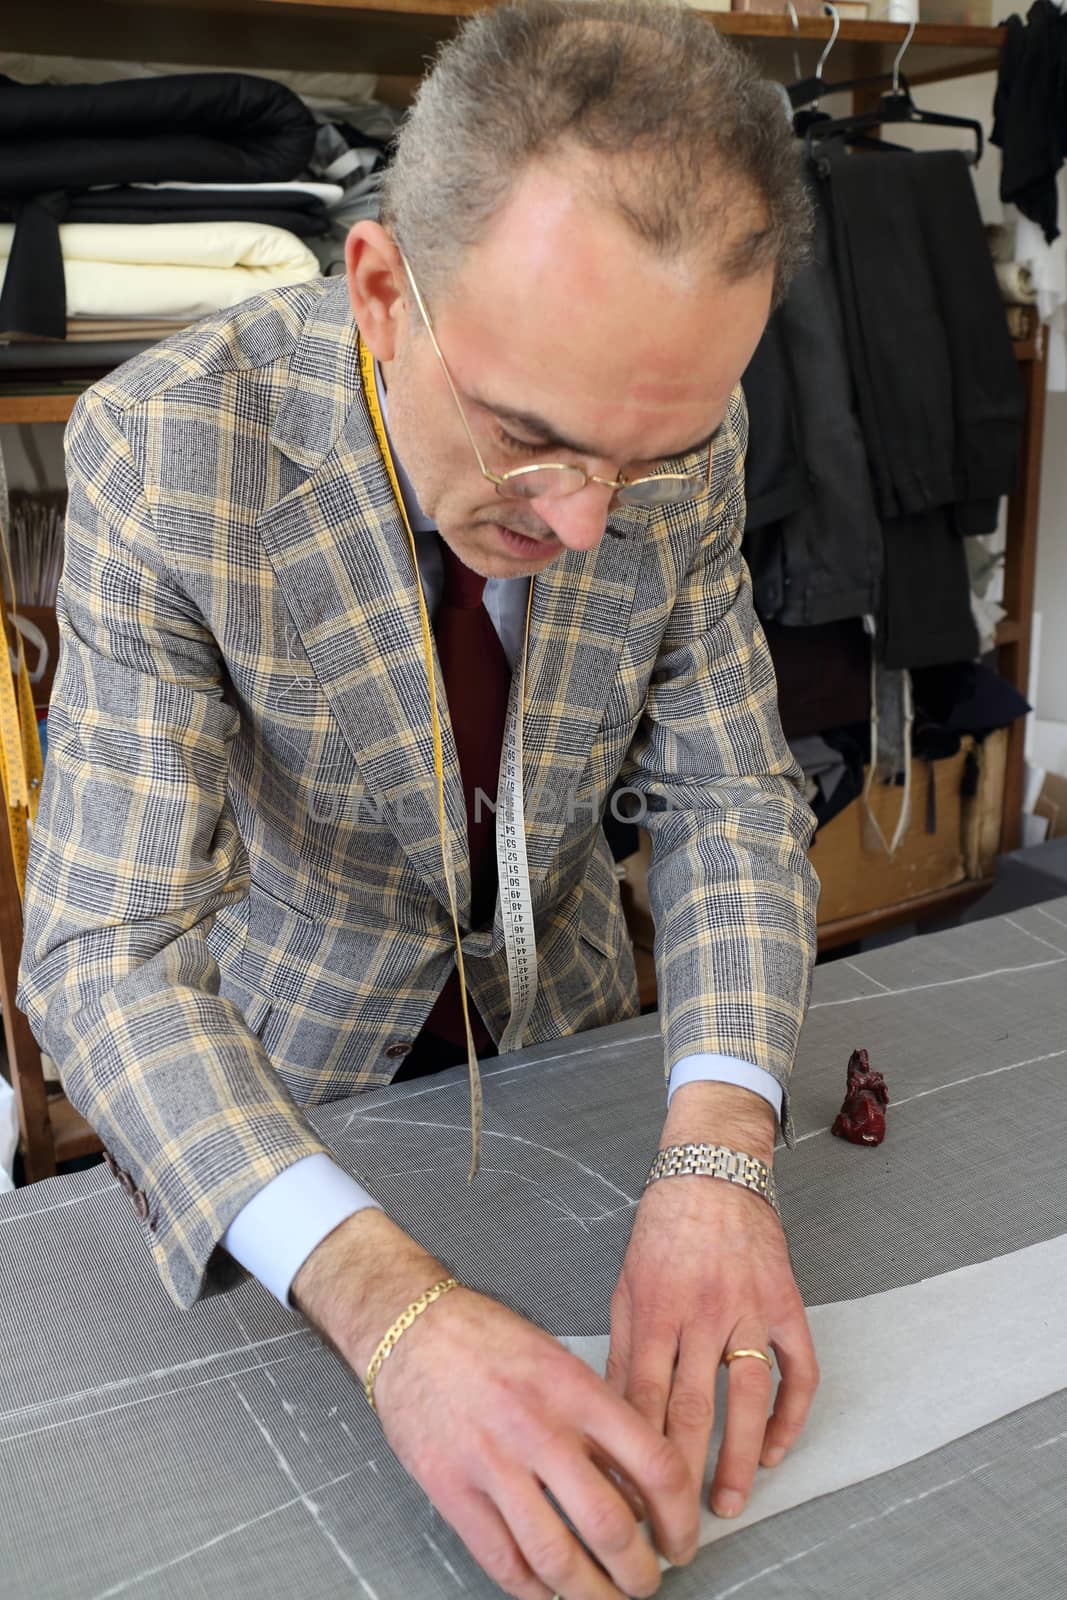 Real tailor near Assisi in Italy